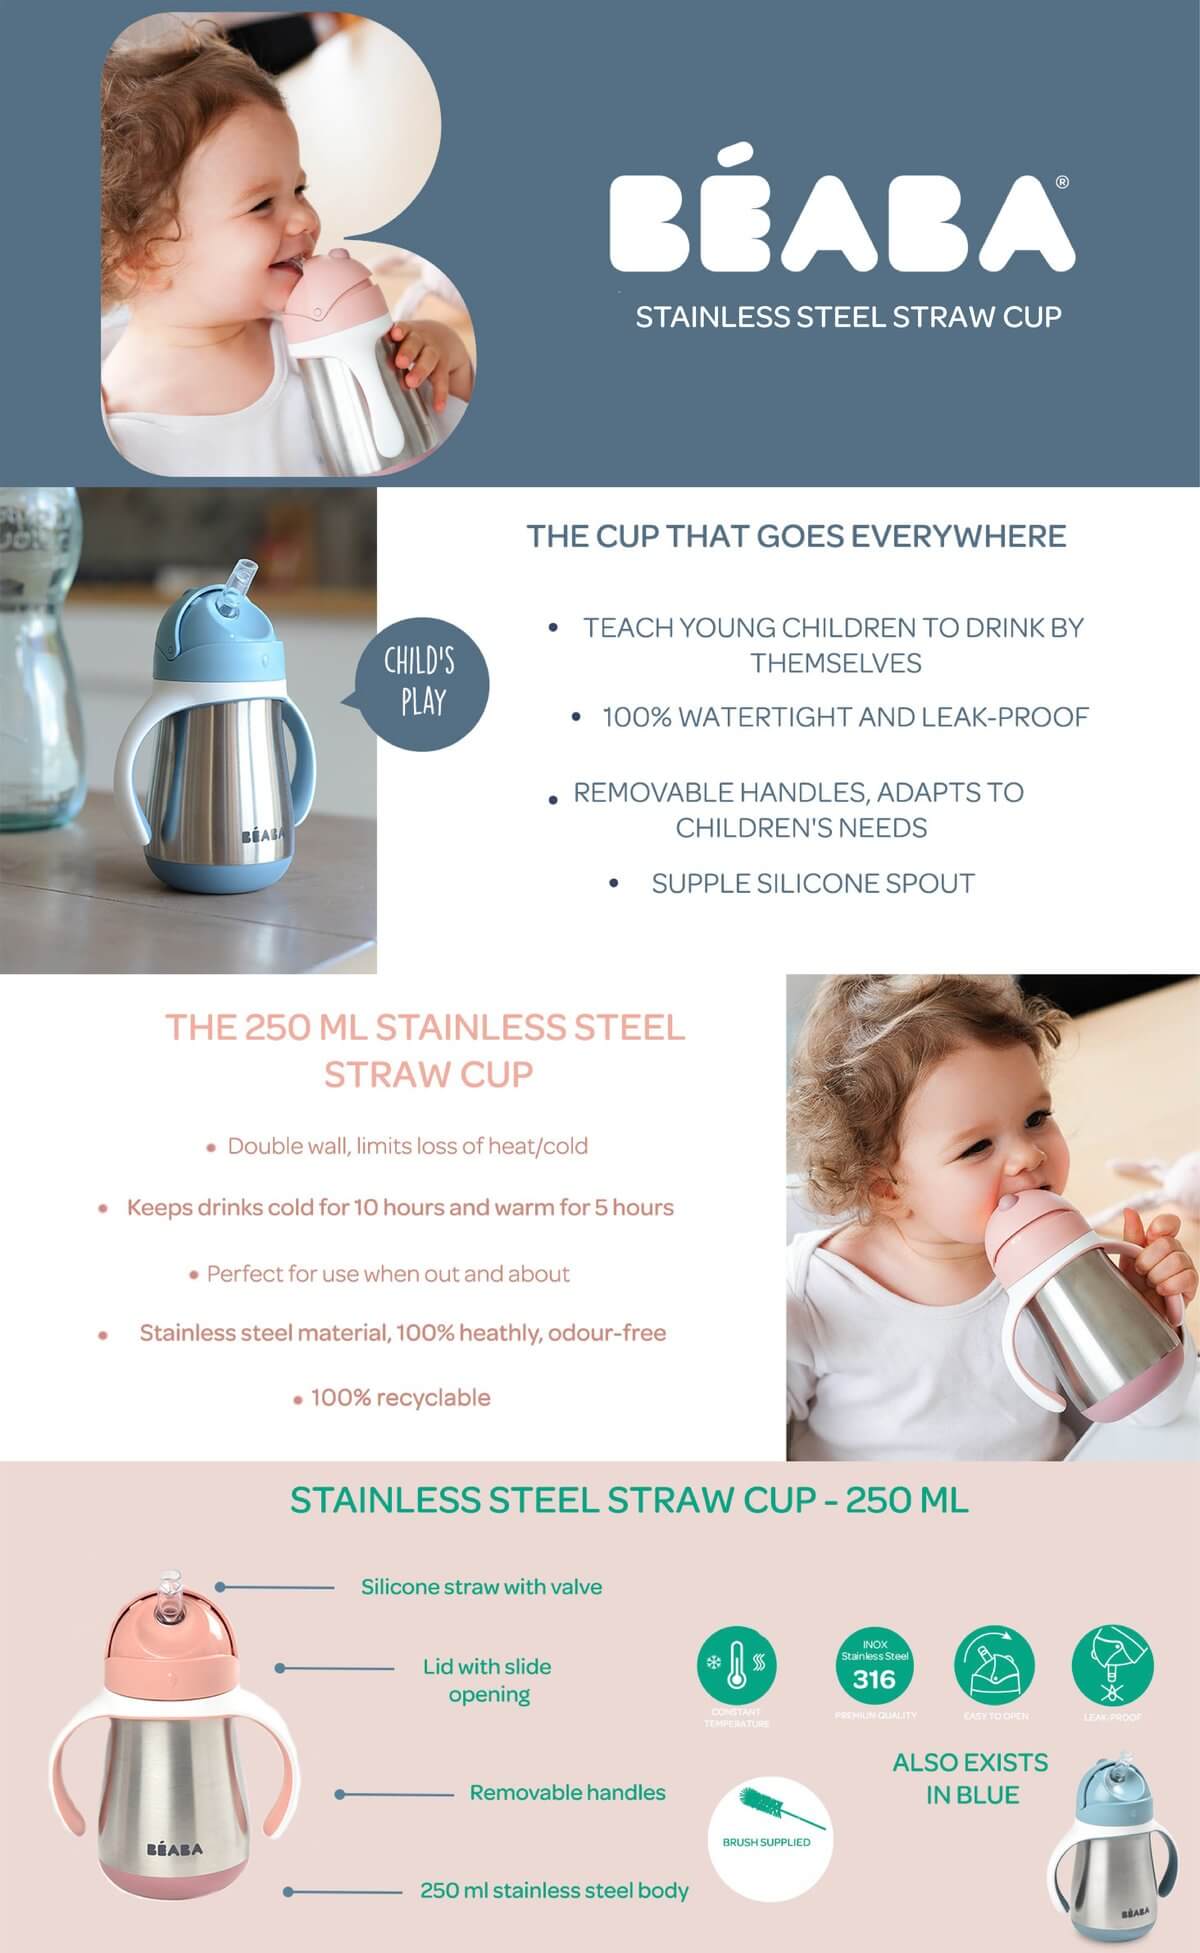 Beaba Stainless Steel Straw Cup 250ml